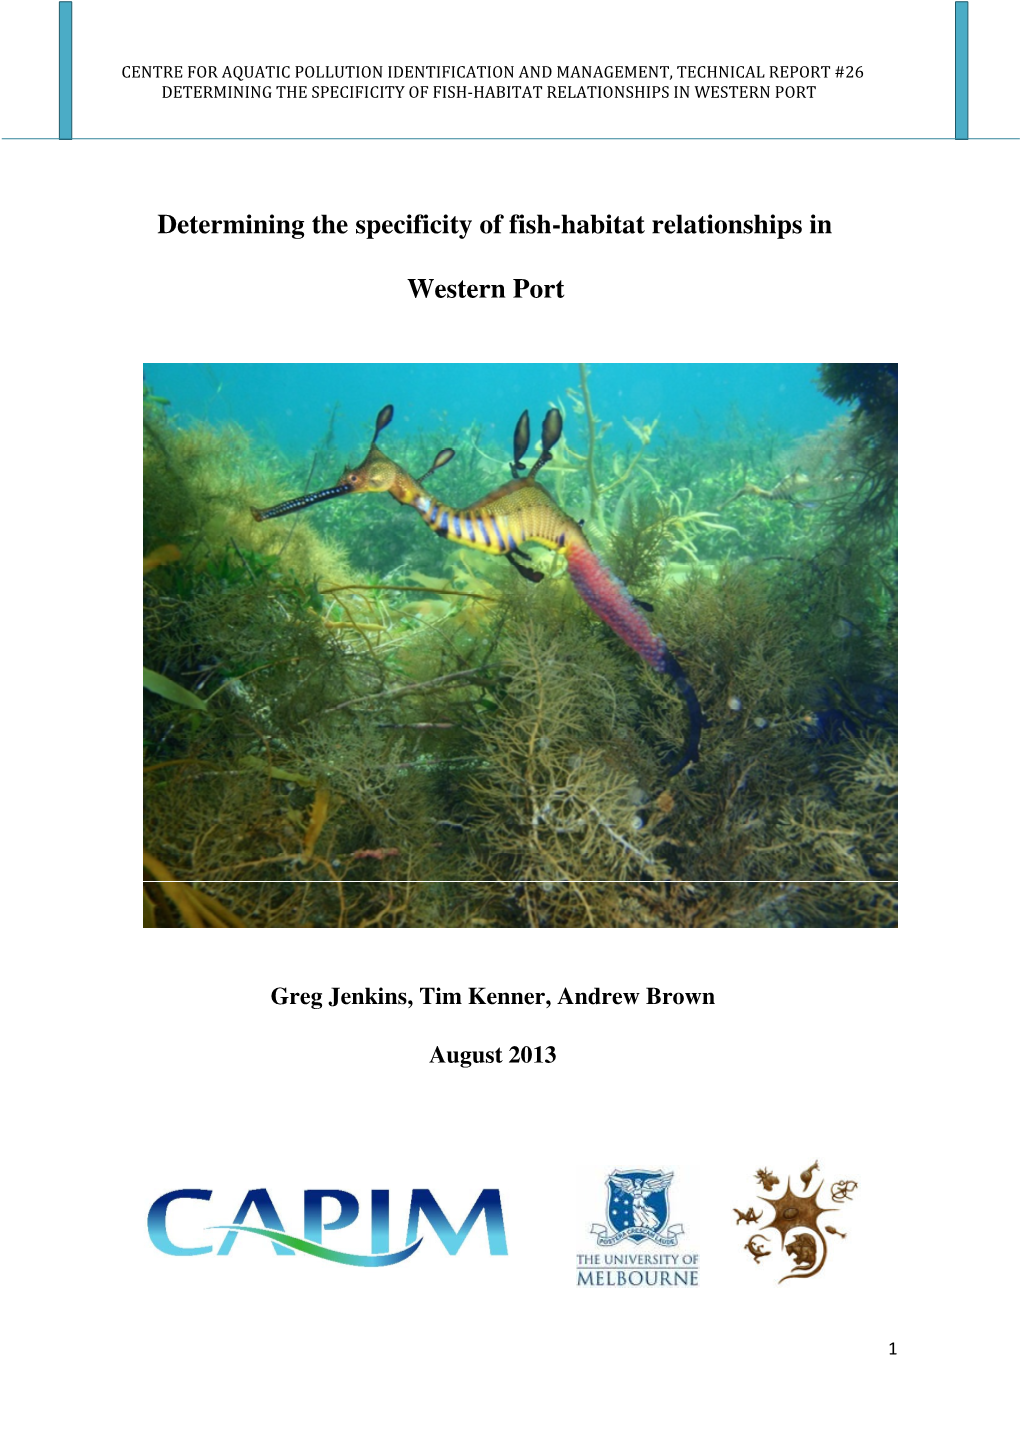 Determining the Specificity of Fish-Habitat Relationships in Western Port